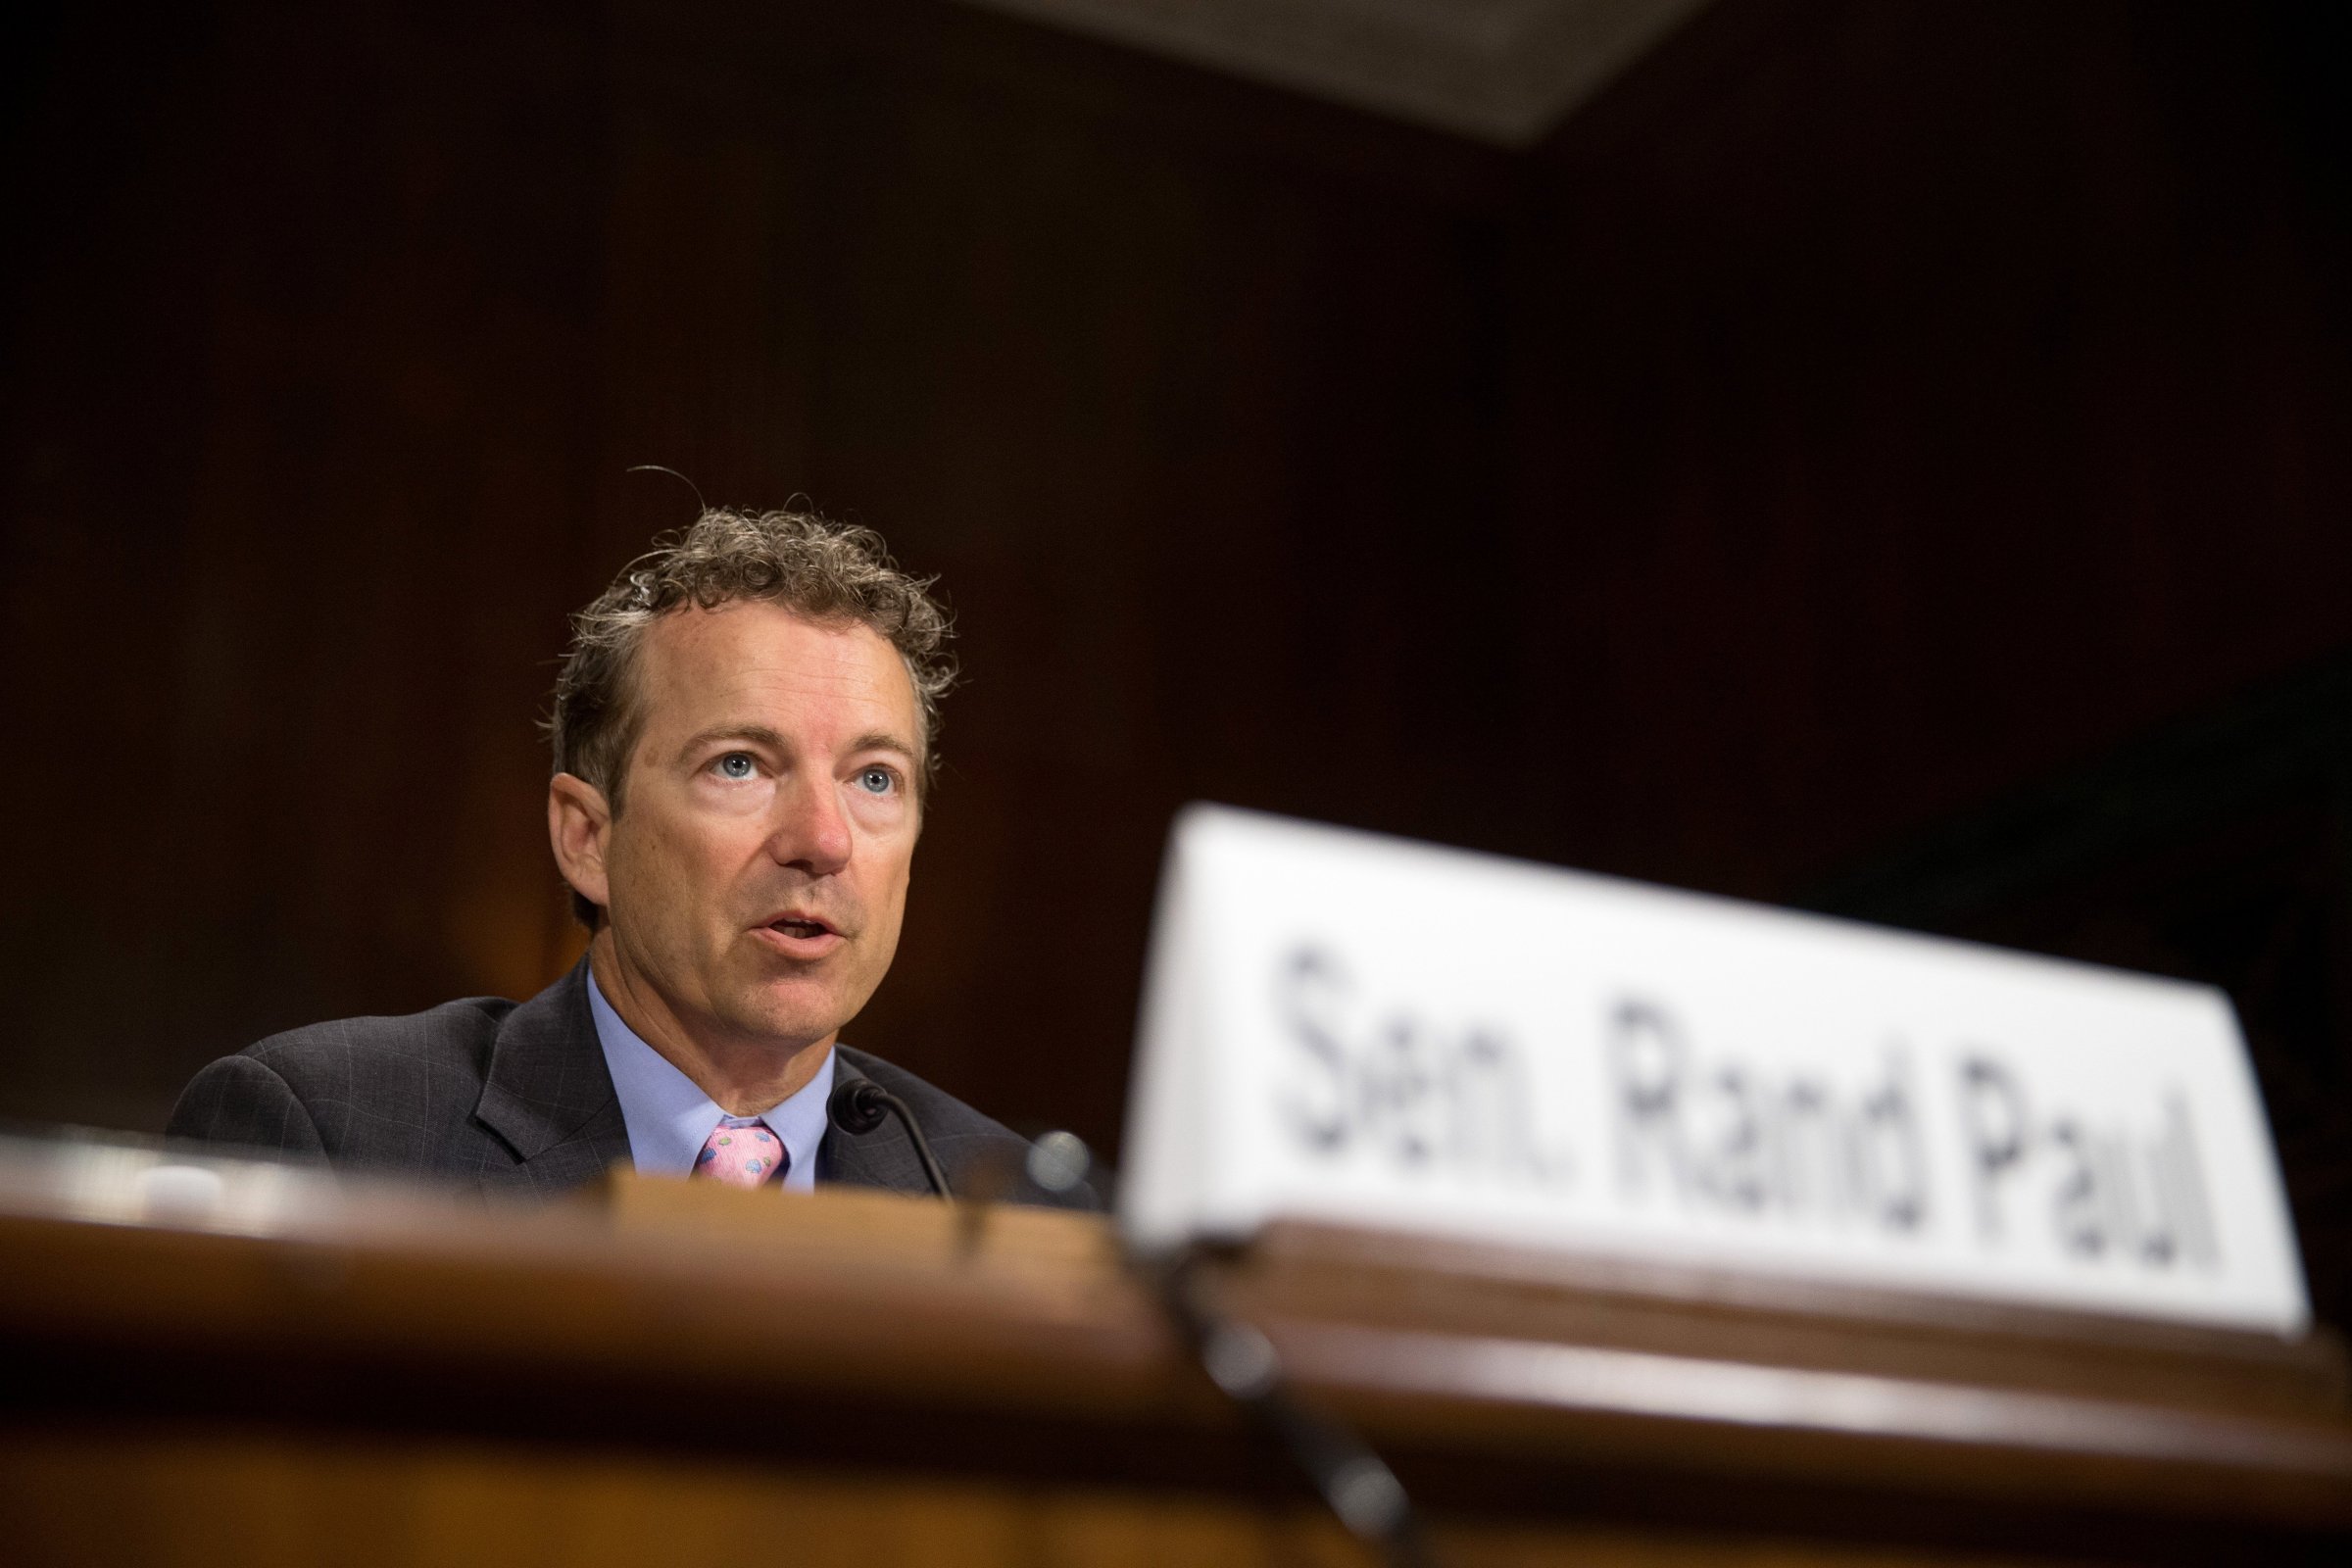 Republican Presidential candidate Sen. Rand Paul, R-Ky. speaks on Capitol Hill in Washington on April 15, 2015, during a Senate Judiciary Committee hearing to examine the need to reform asset forfeiture.